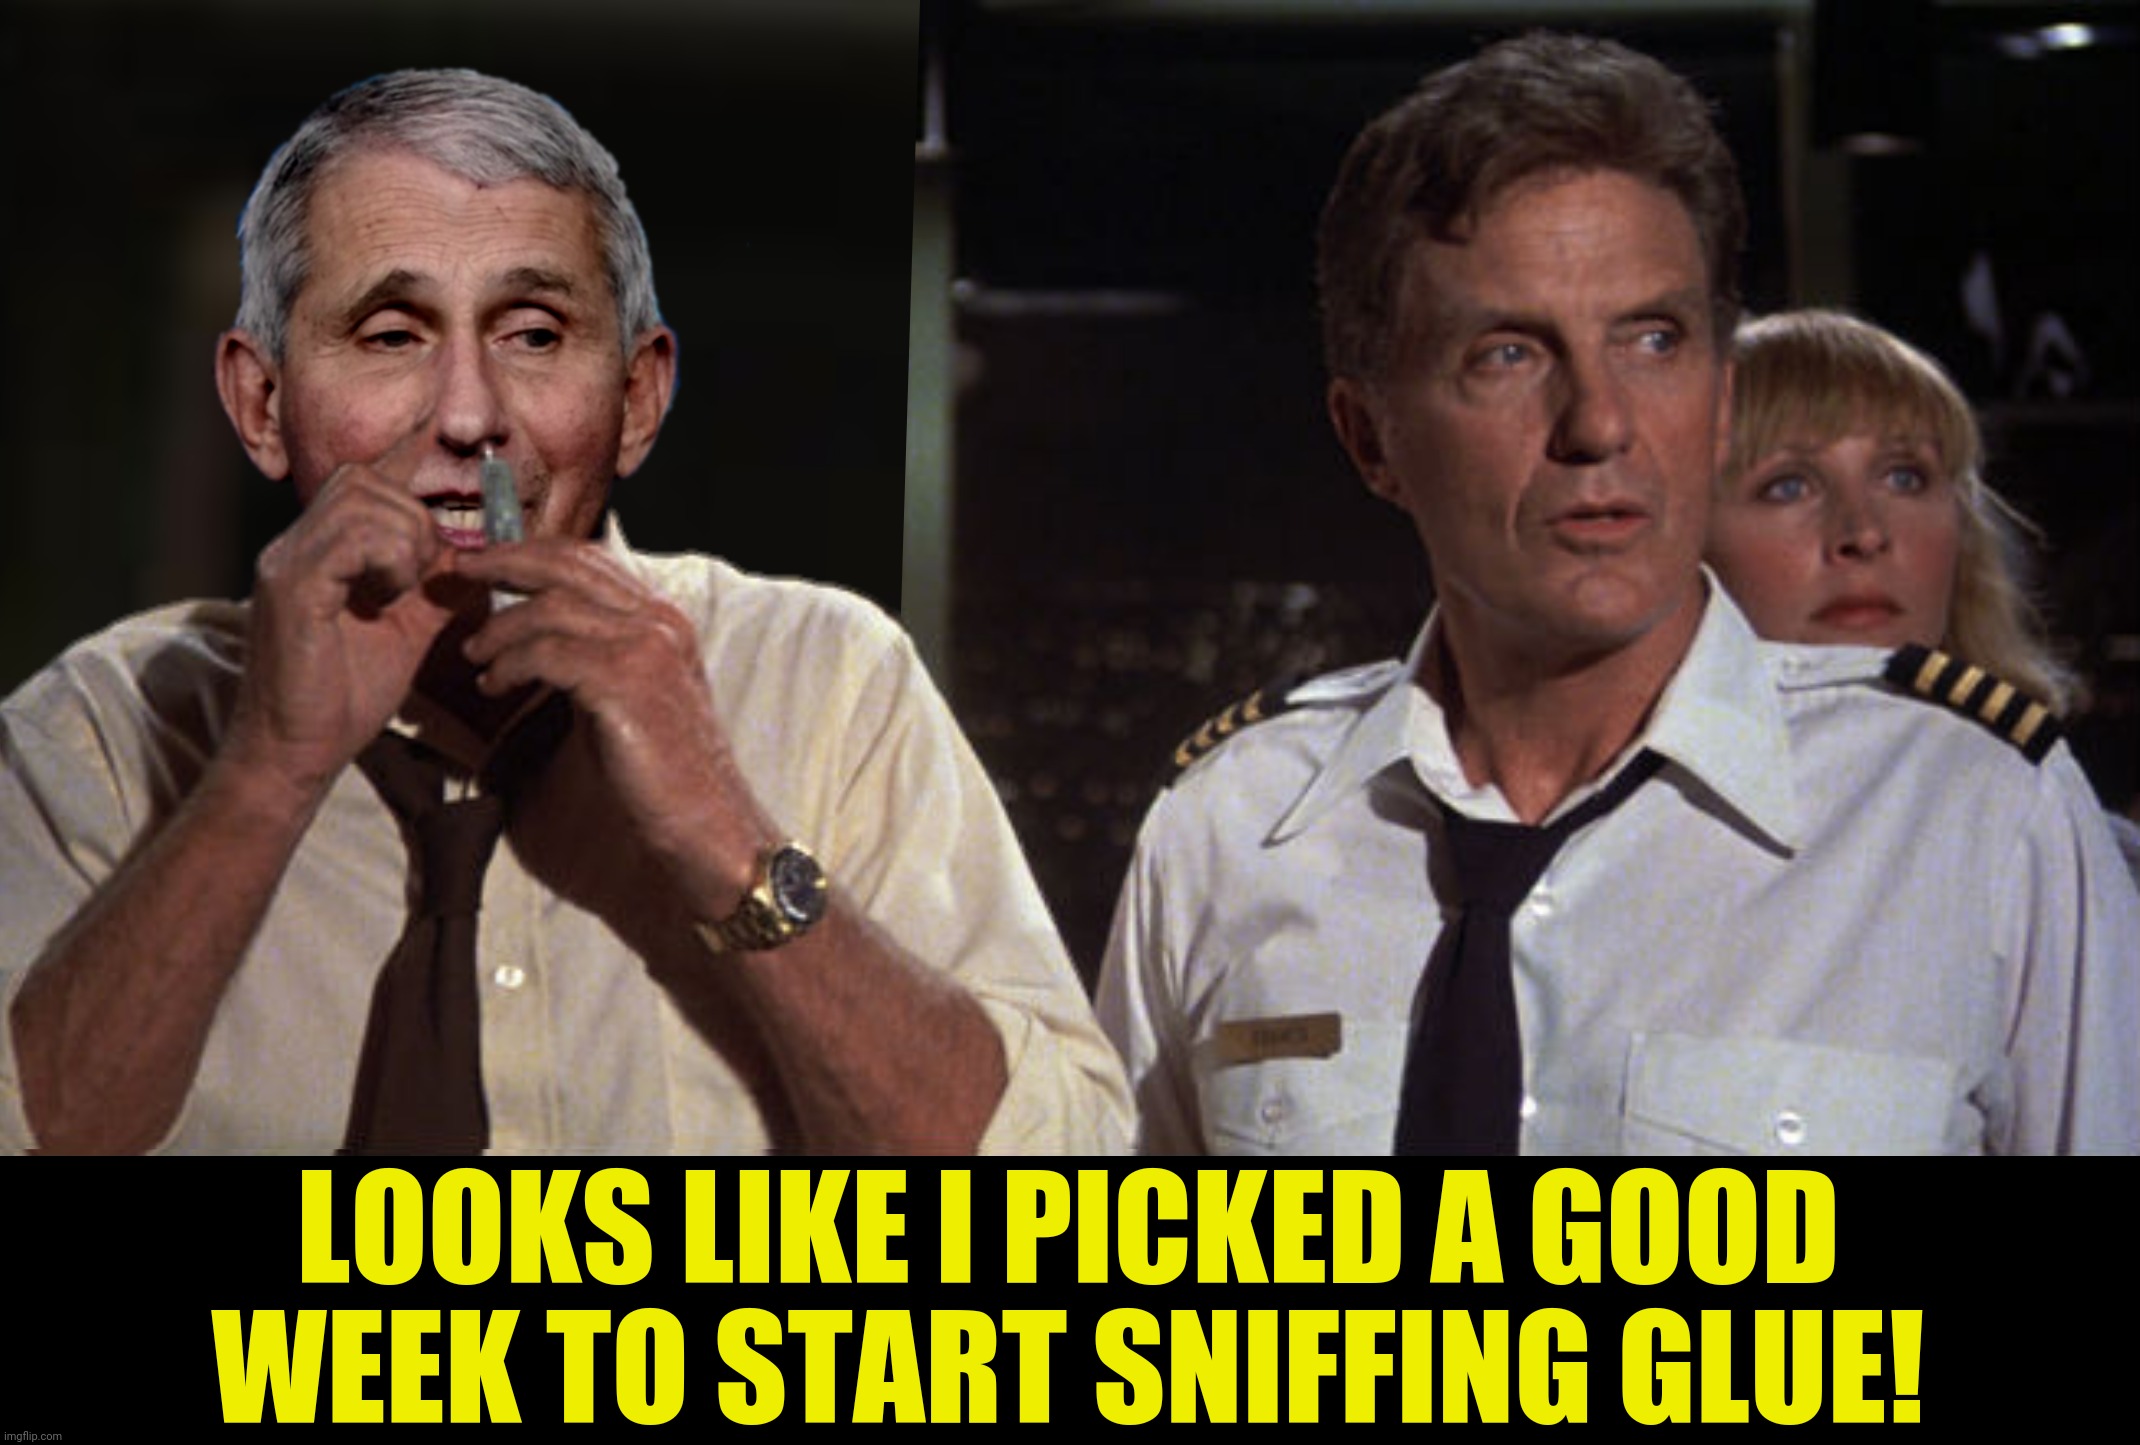 LOOKS LIKE I PICKED A GOOD WEEK TO START SNIFFING GLUE! | made w/ Imgflip meme maker